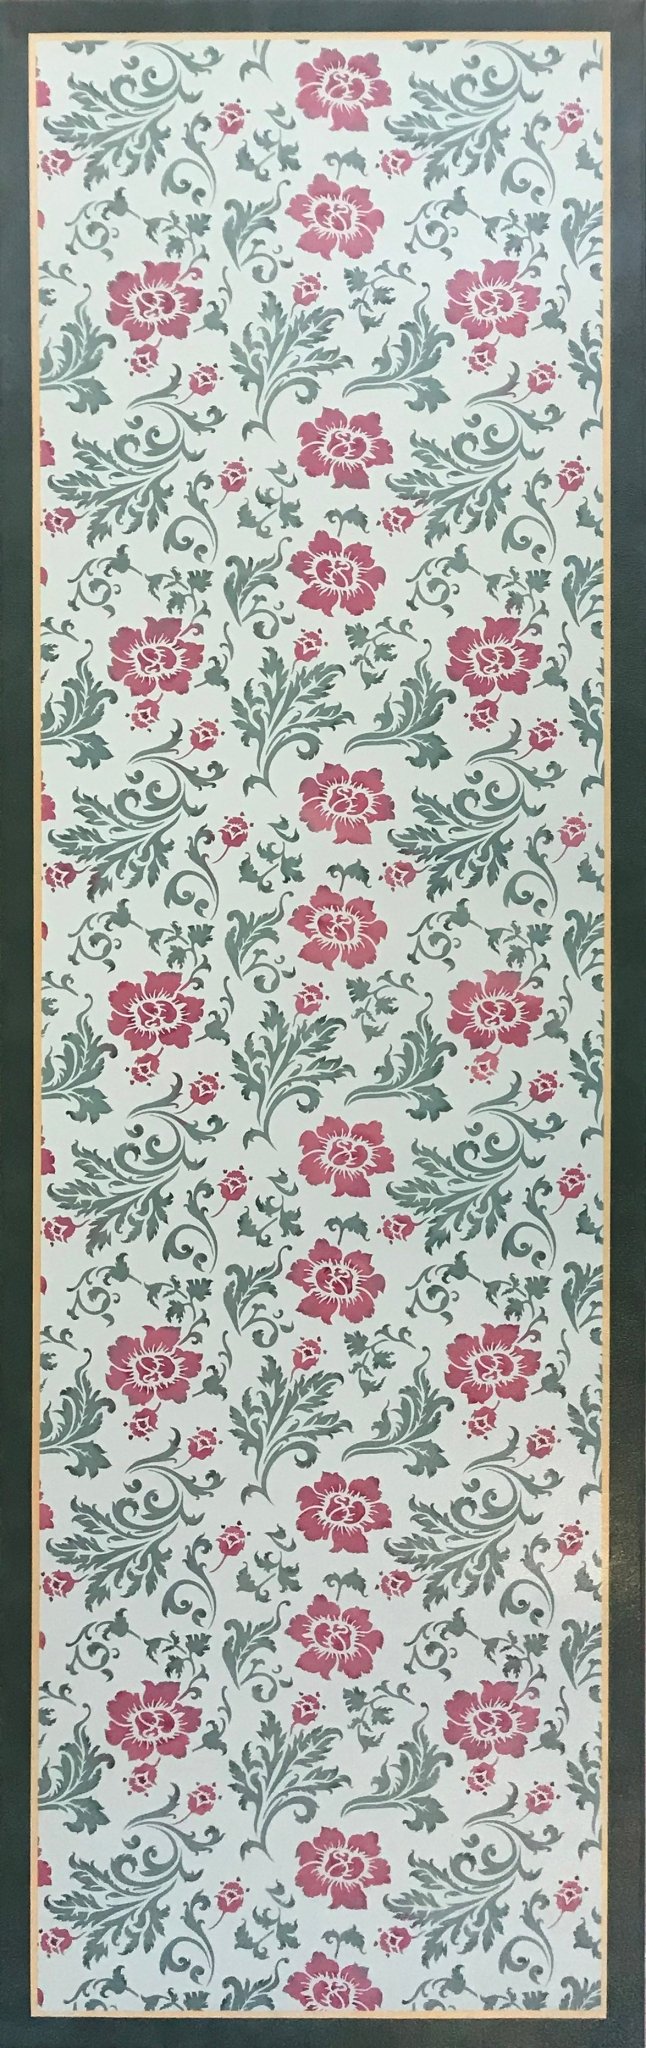 Full image of this floorcloth based on a lovely all-over floral pattern that is organic in its execution, creating a carpet of blooms, buds, and leaves.